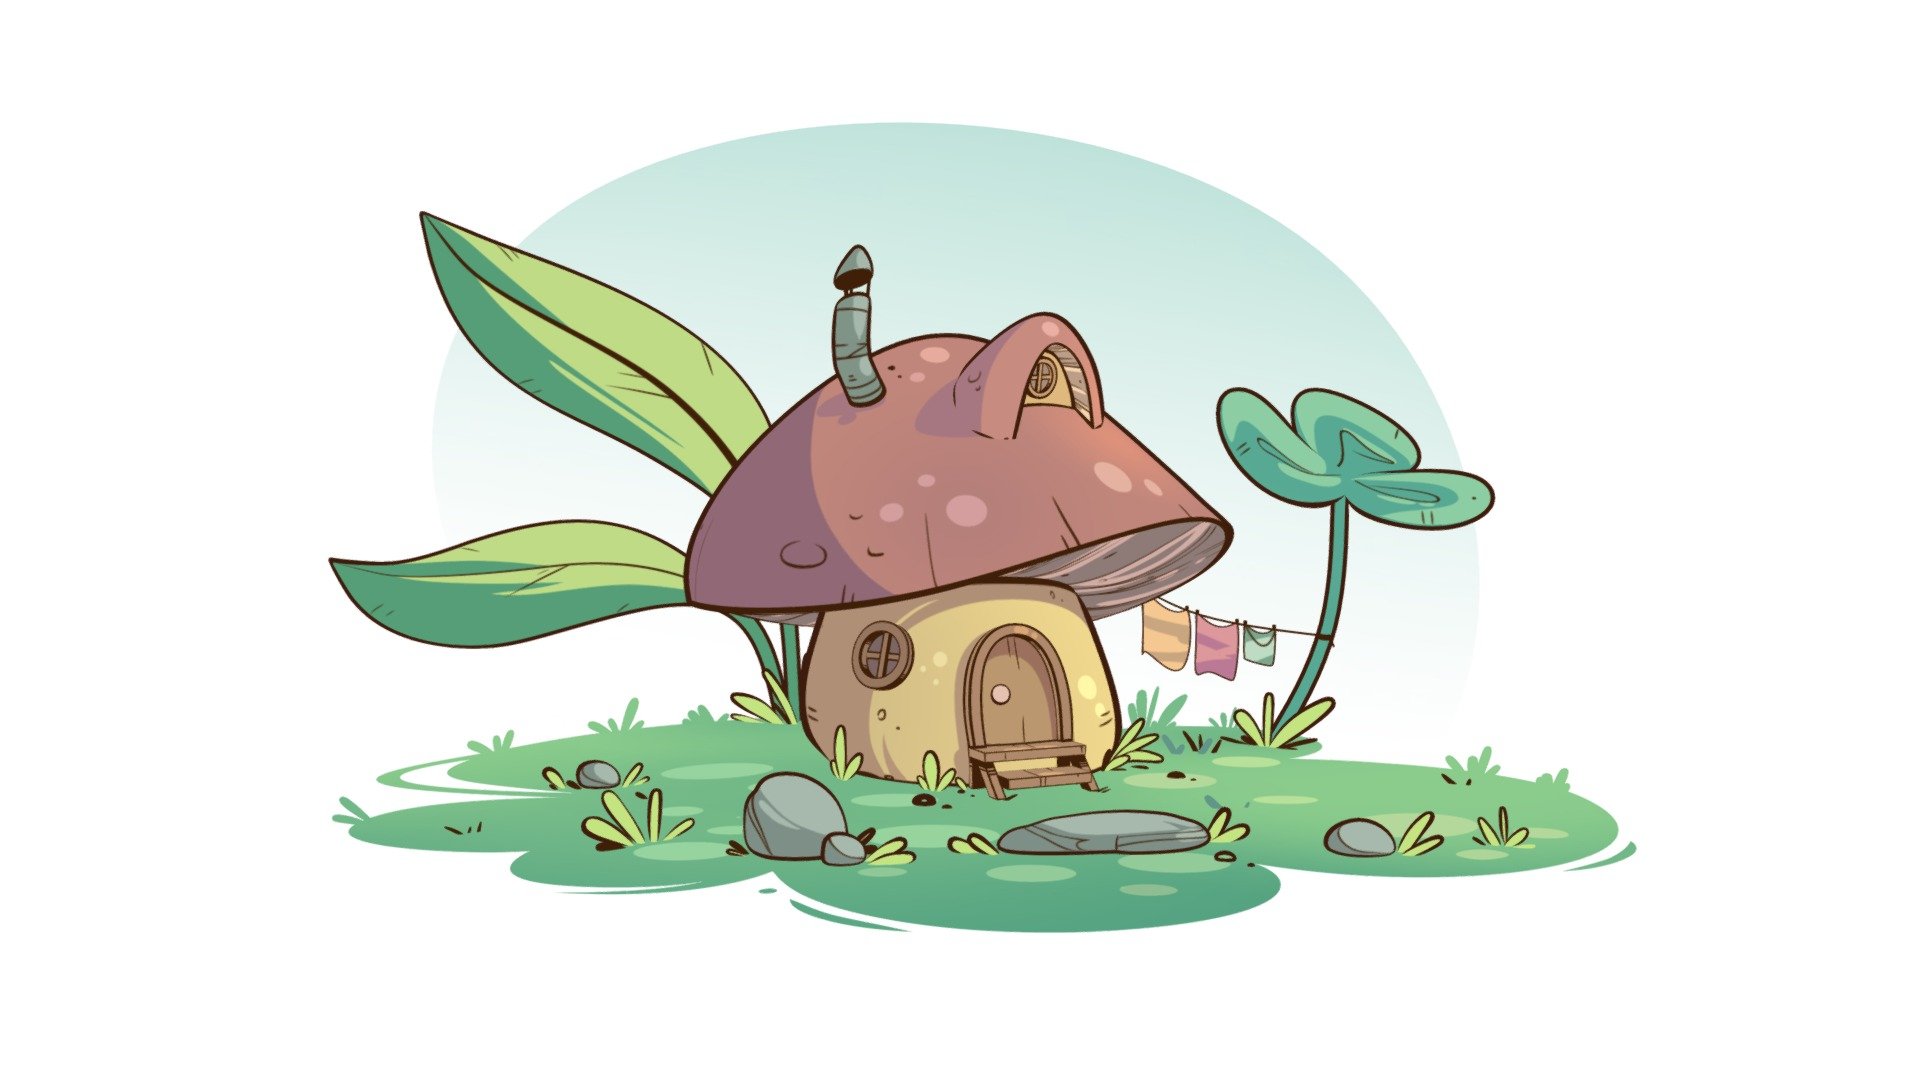 Practice project I made in Blender and Photoshop. The concept art was made by Yoshi Itice. I made a overview video on my YouTube channel where I show my process for NPR.

Concept: https://shorturl.at/aBOY2

My YouTube: https://youtube.com/@Entikai - Mushroom House - Toon Shaded - 3D model by Entikai 3d model